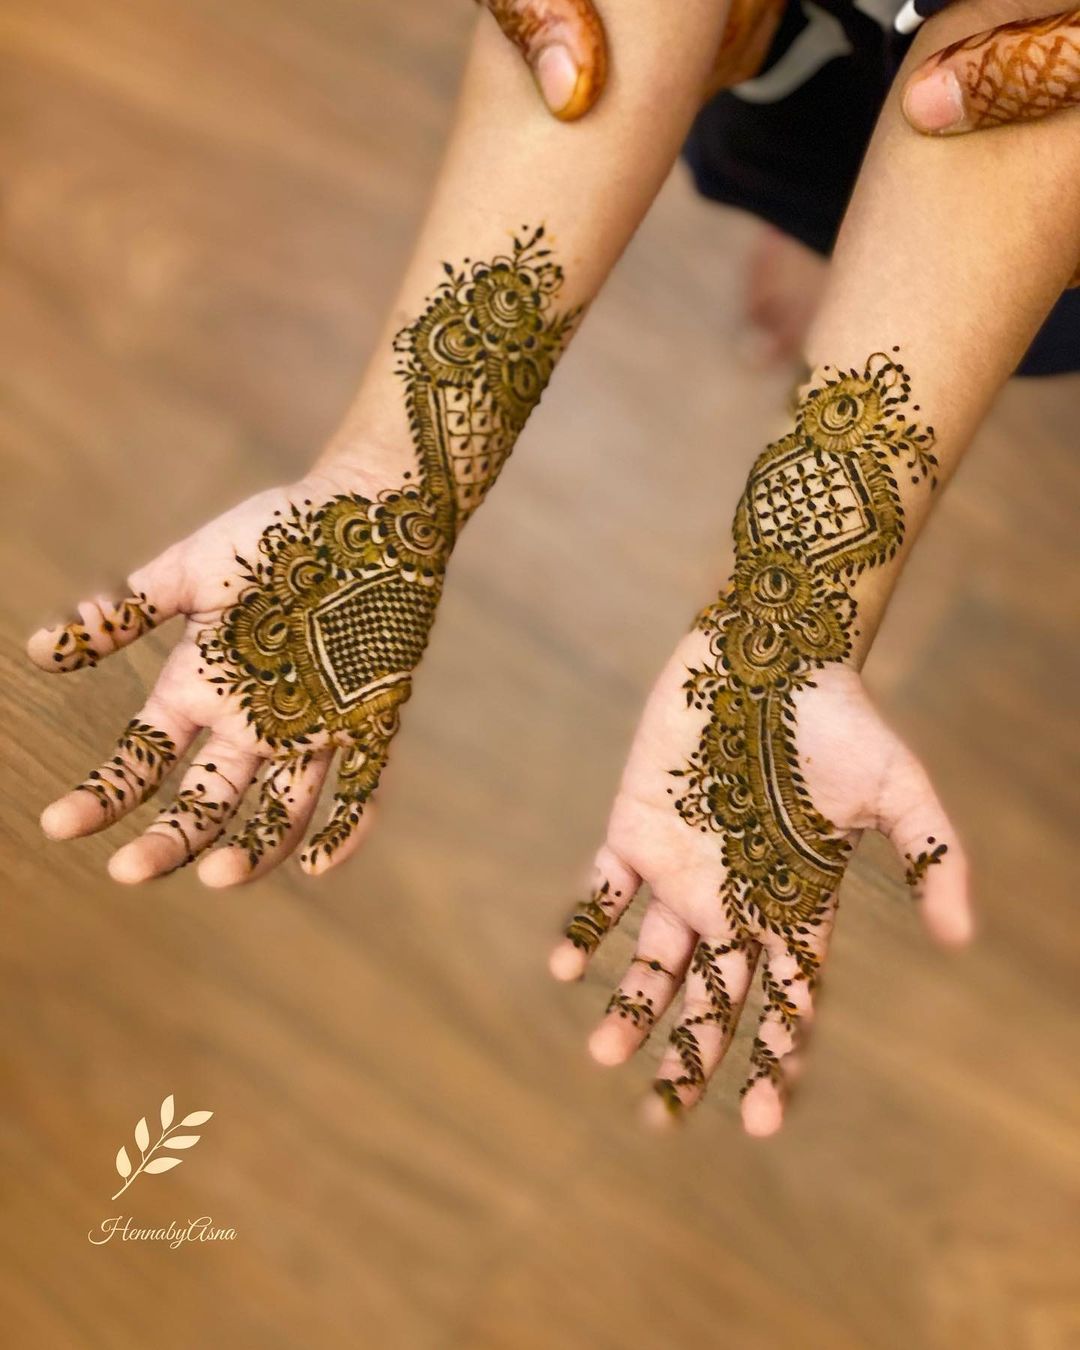 Mehndi Designs For Kids Vol 1:Amazon.com:Appstore for Android